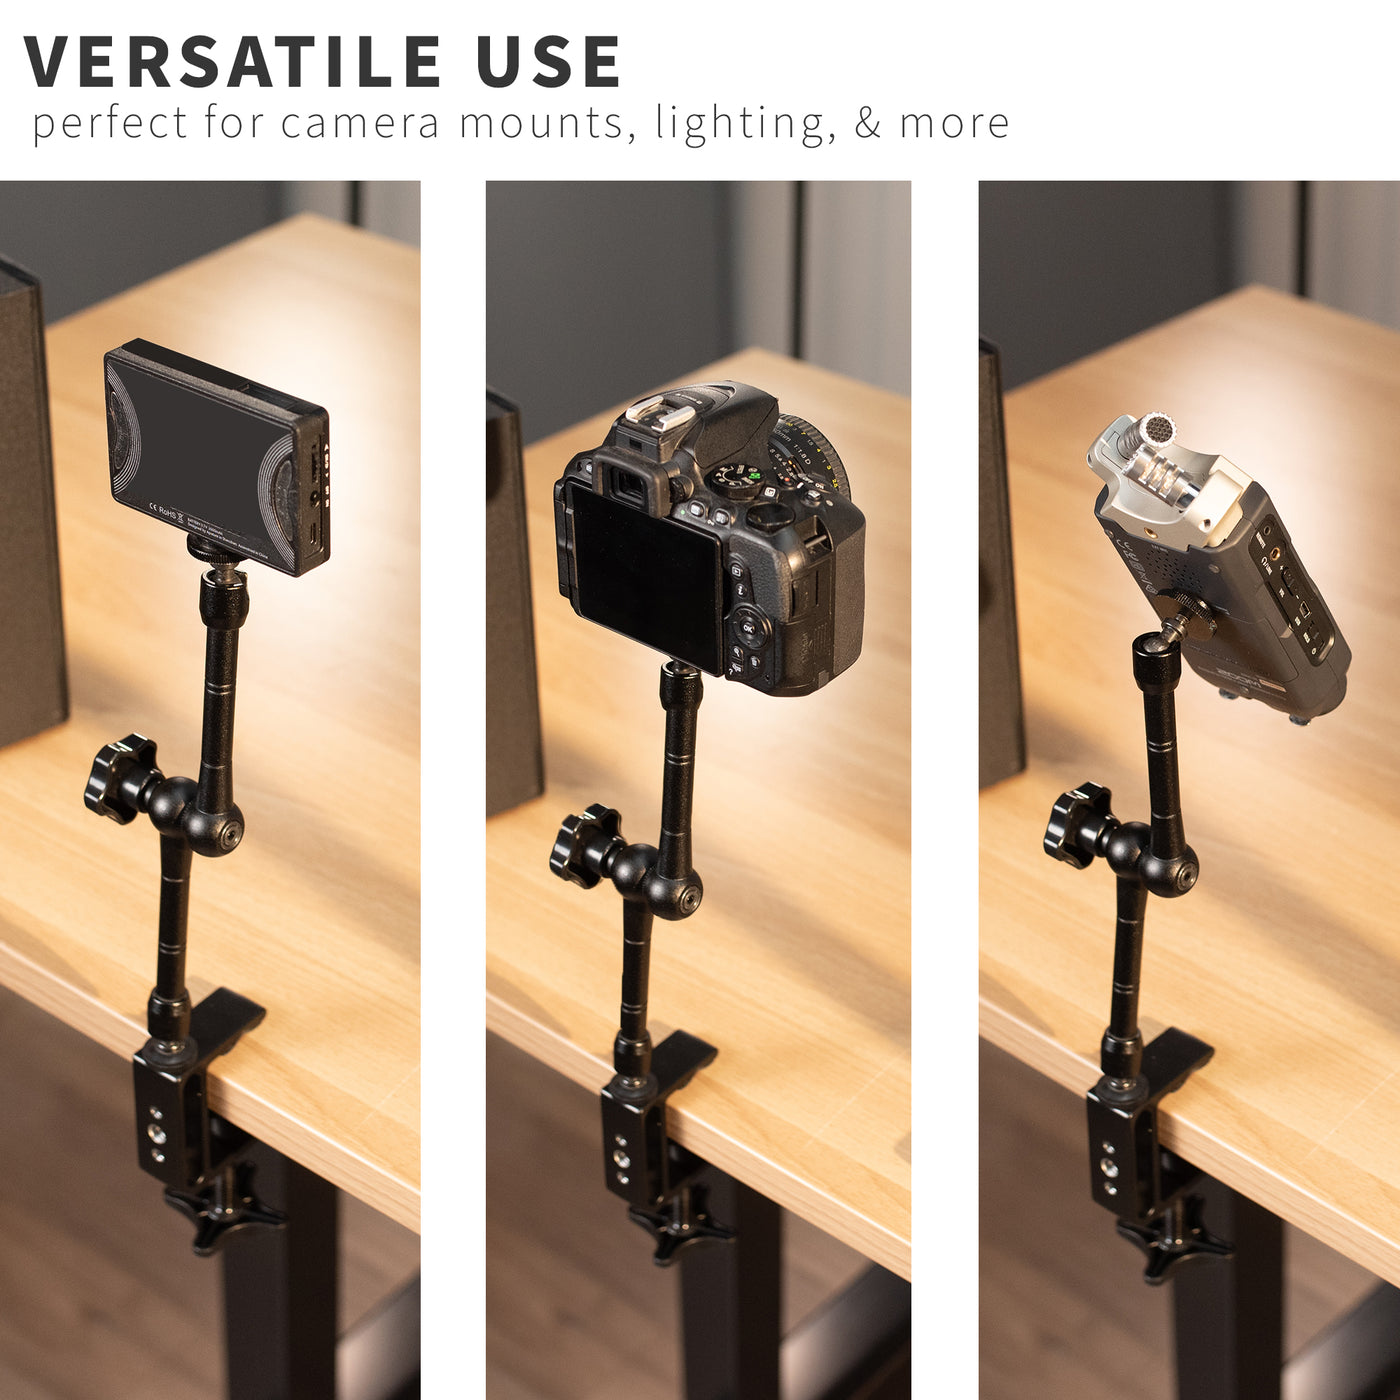 Versatile clamp-on mounts that can be used to securely mount a variety of studio and office equipment.